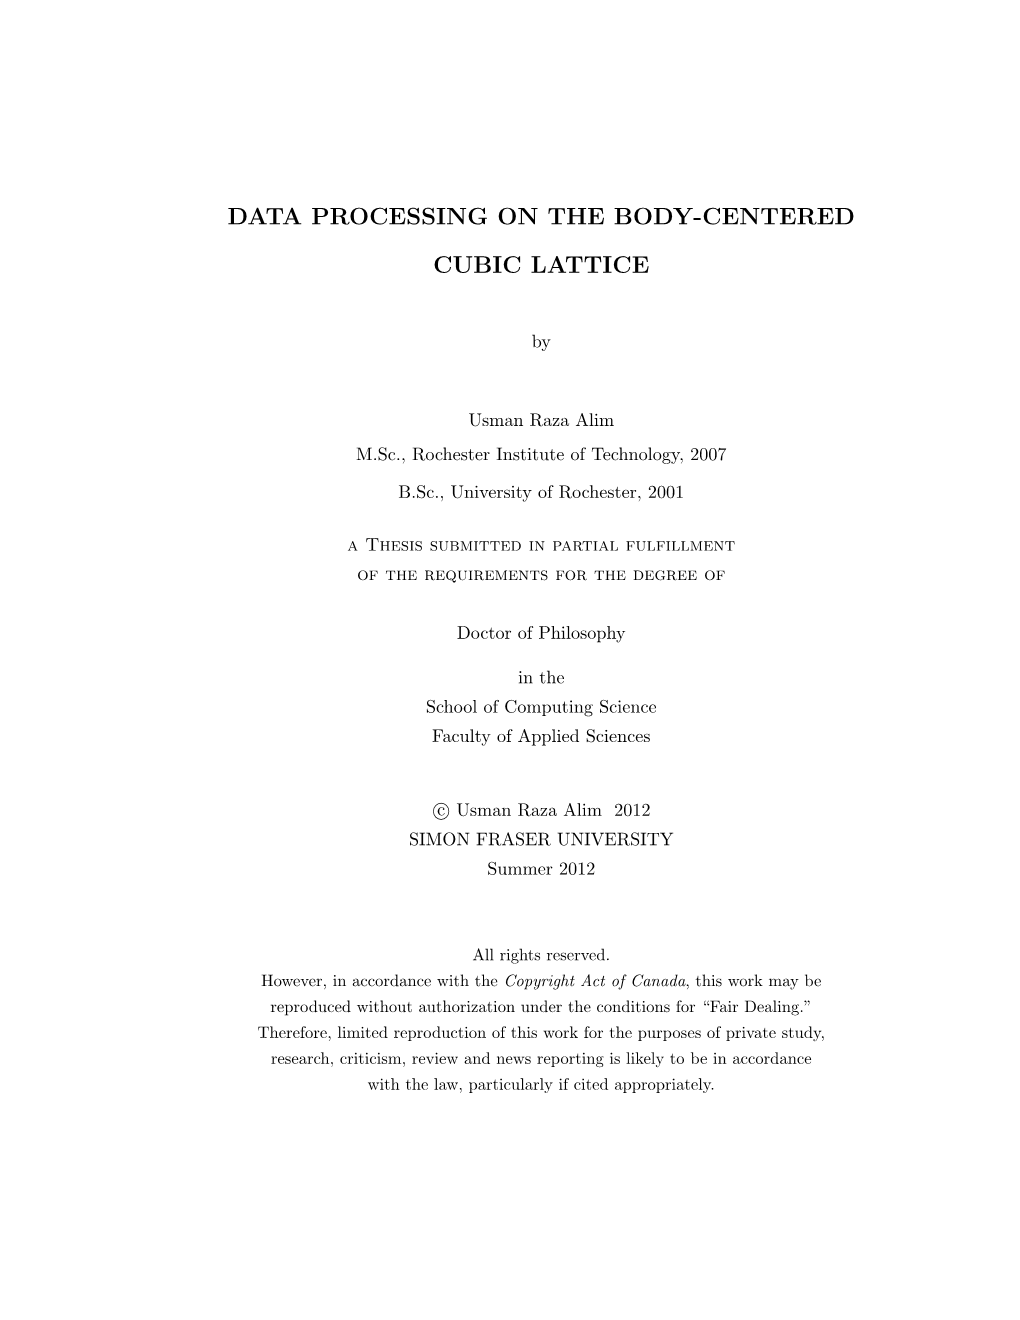 Data Processing on the Body-Centered Cubic Lattice